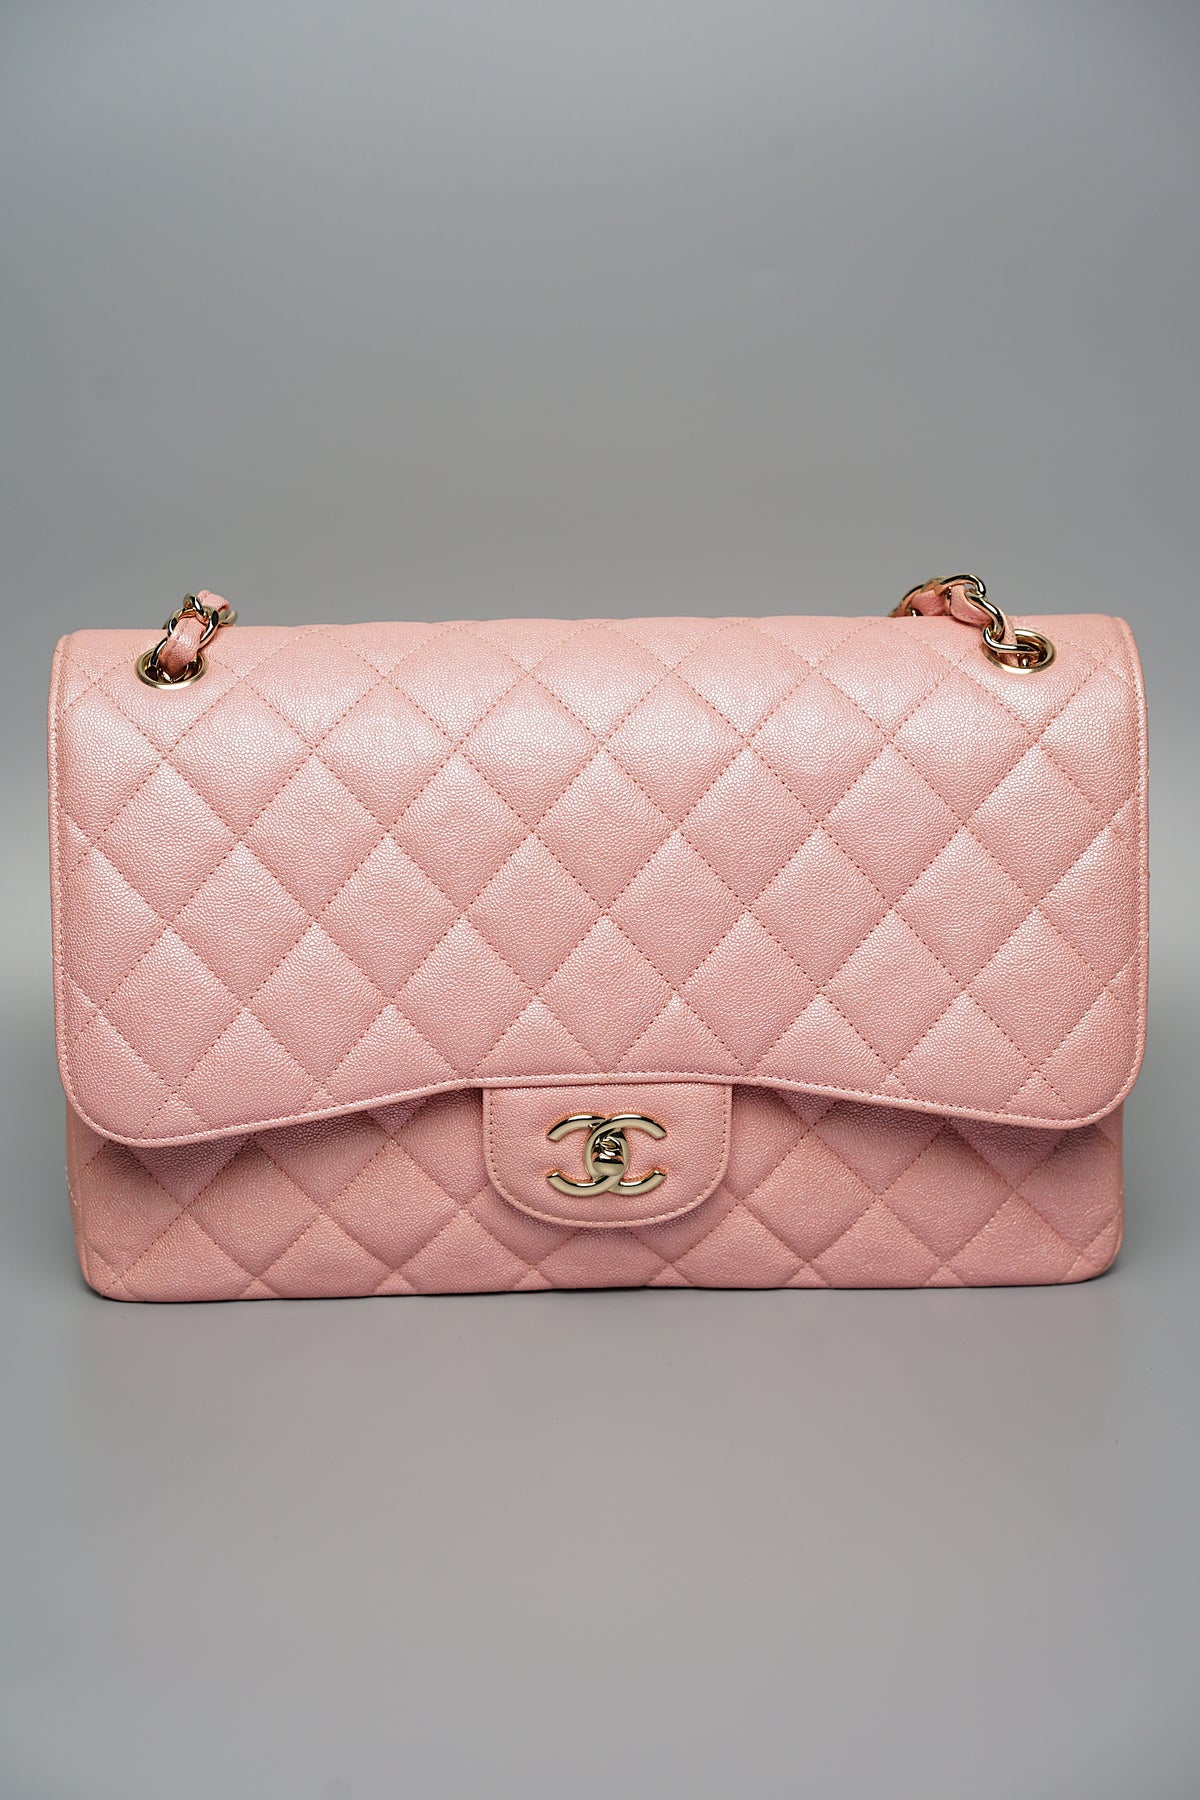 Chanel Jumbo Double Flap in Iridescent Pink Caviar (Brand New